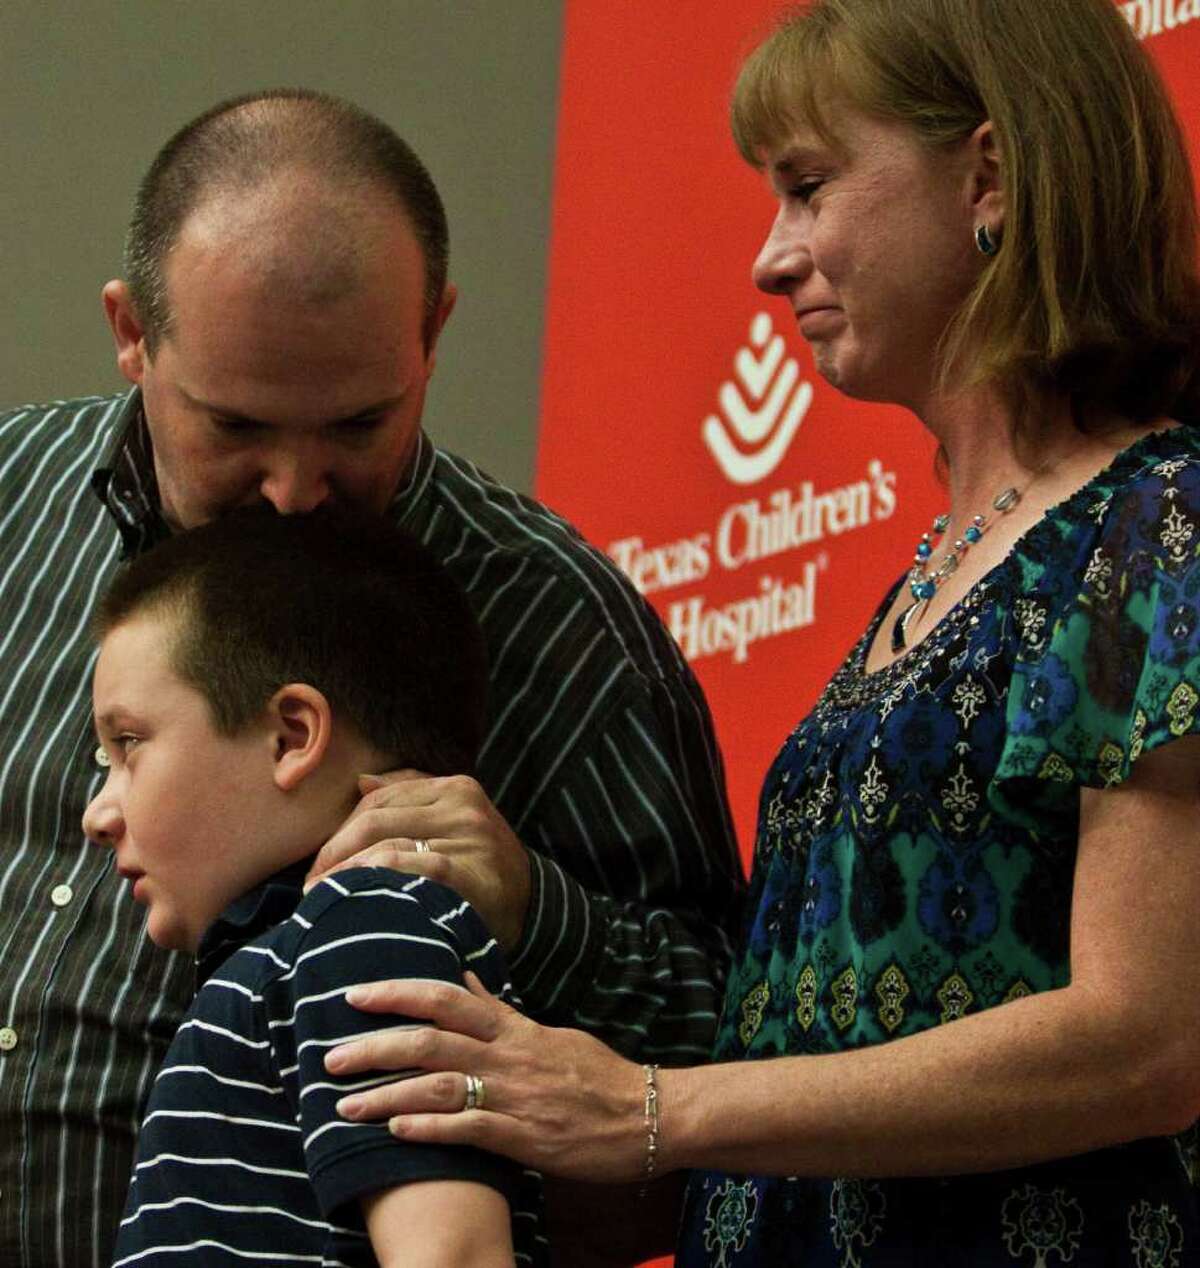 Khris Dysart, left, father, son Keagan, 9, and mother Robin, speak during a presentation on surgery used to help cure Keagan of his epileptic seizures July 18, 2011 in Houston at Texas Children's Hospital. Texas Children's Hospital pioneers used a MRI-guided laser surgery to perform a revolutionary new epilepsy treatment that significantly reduces the risk of patient complications and recovery time, July 18, 2011in Houston. Children's Hospital is the first hospital in the world to use real-time MRI-guided thermal imaging and laser technology to destroy lesions in the brain that cause epilepsy and uncontrollable seizures. A recent example of the effectiveness of this new surgery is nine-year-old Texas Children's Hospital patient Keagan Dysart, of Converse, Texas, who suffered from two types of epileptic seizures when he was diagnosed with a hypothalamic hamartoma in his brain. The gelastic seizure caused him to giggle and laugh uncontrollably two or three times an hour. Keagan would also periodically experience a tonic seizure, with generalized body stiffening and loss of awareness that caused him to fall asleep for sometimes up to an hour afterward. Keaganâs case was particularly high risk because his lesion was located in the hypothalamus, near the brain stem. In this highly sensitive region, there are a myriad of potentially serious complications from surgery including loss of sight, damage to the pituitary gland, stroke from artery damage or development of diabetes insipidus (DI), a potentially fatal condition where the kidneys are unable to conserve water because of disruption to the area of the brain that releases the bodyâs anti-diuretic hormone. (Eric Kayne/For the Chronicle)